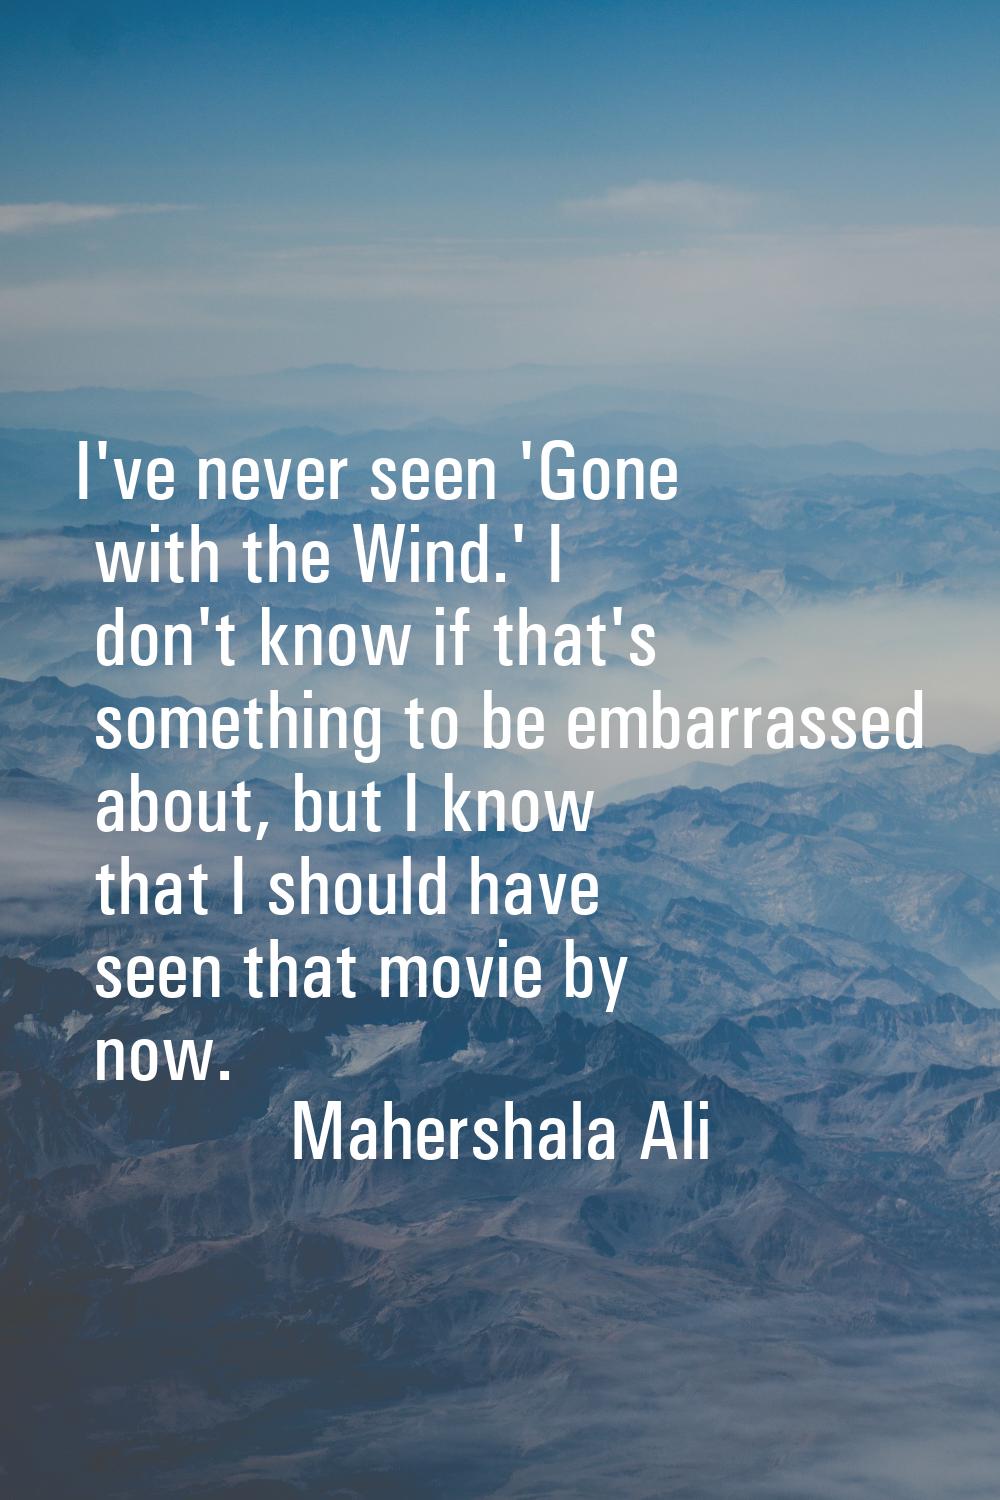 I've never seen 'Gone with the Wind.' I don't know if that's something to be embarrassed about, but